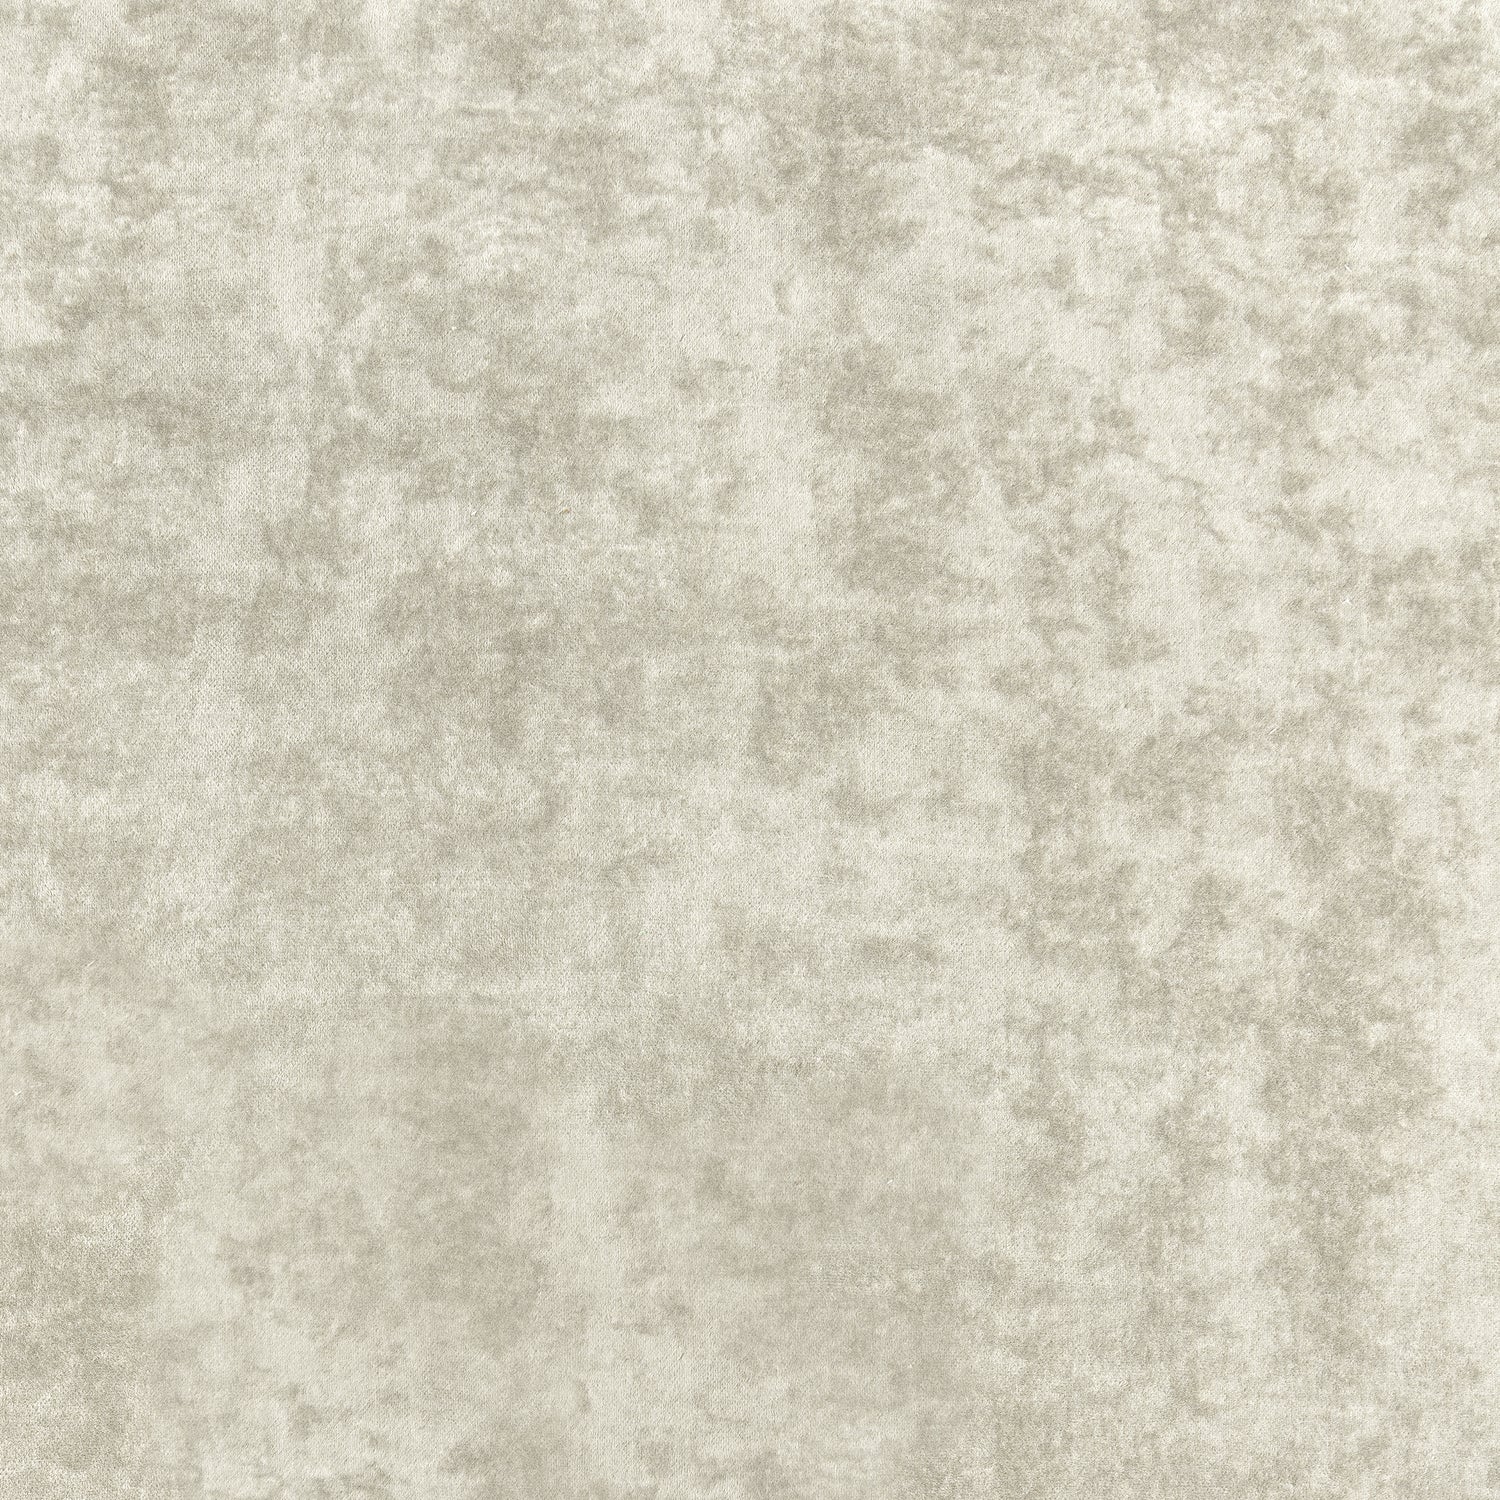 Celeste Velvet fabric in bisque color - pattern number W8966 - by Thibaut in the Lyra Velvets collection